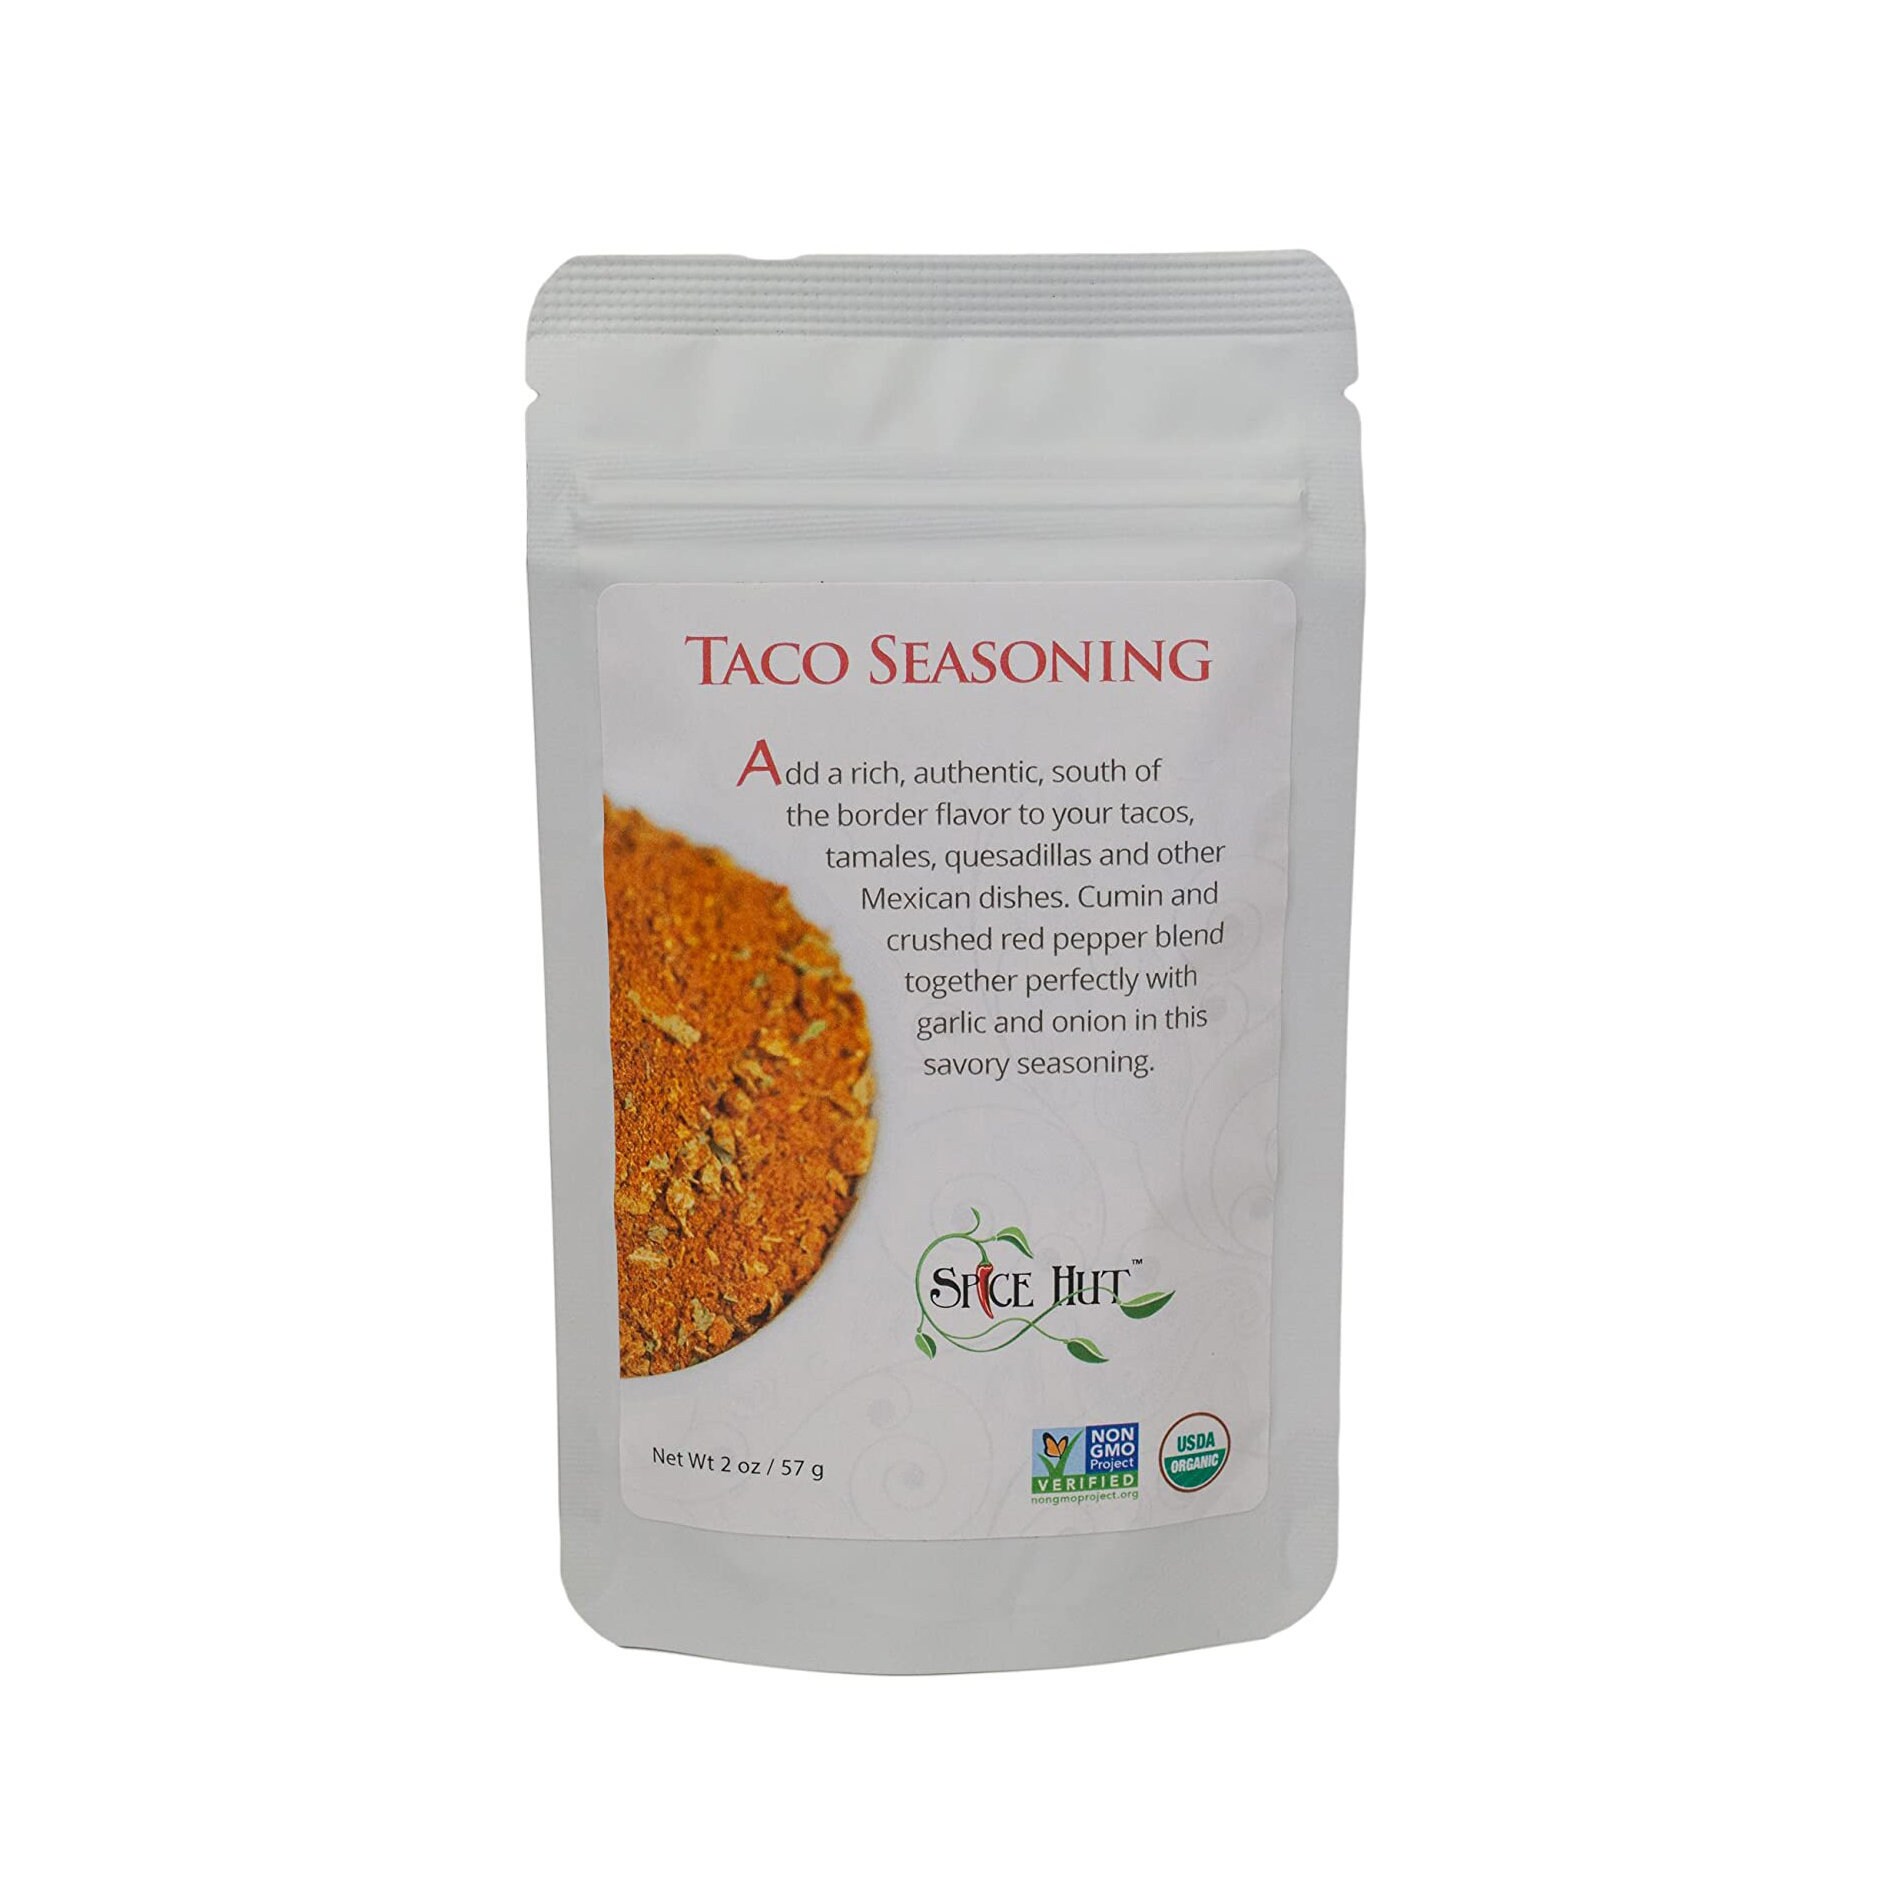 Organic Taco Seasoning, Spice Blend For Southwestern Cooking, 2 Ounce - Salt Free Mexican Food Spices